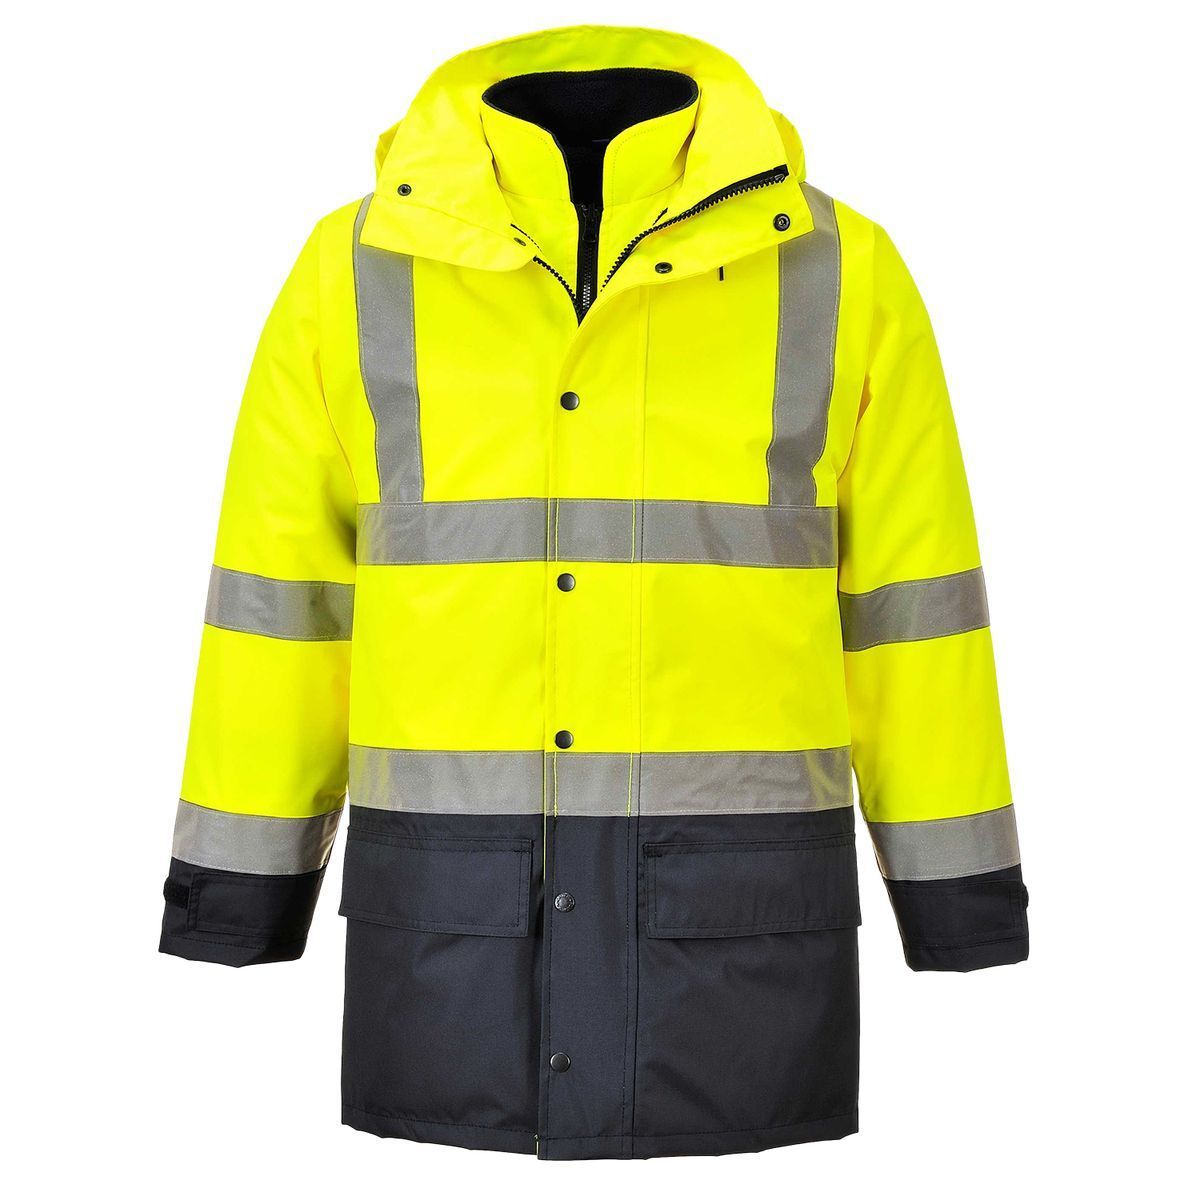 Style US768 5in1 HiVis Executive Jacket-5